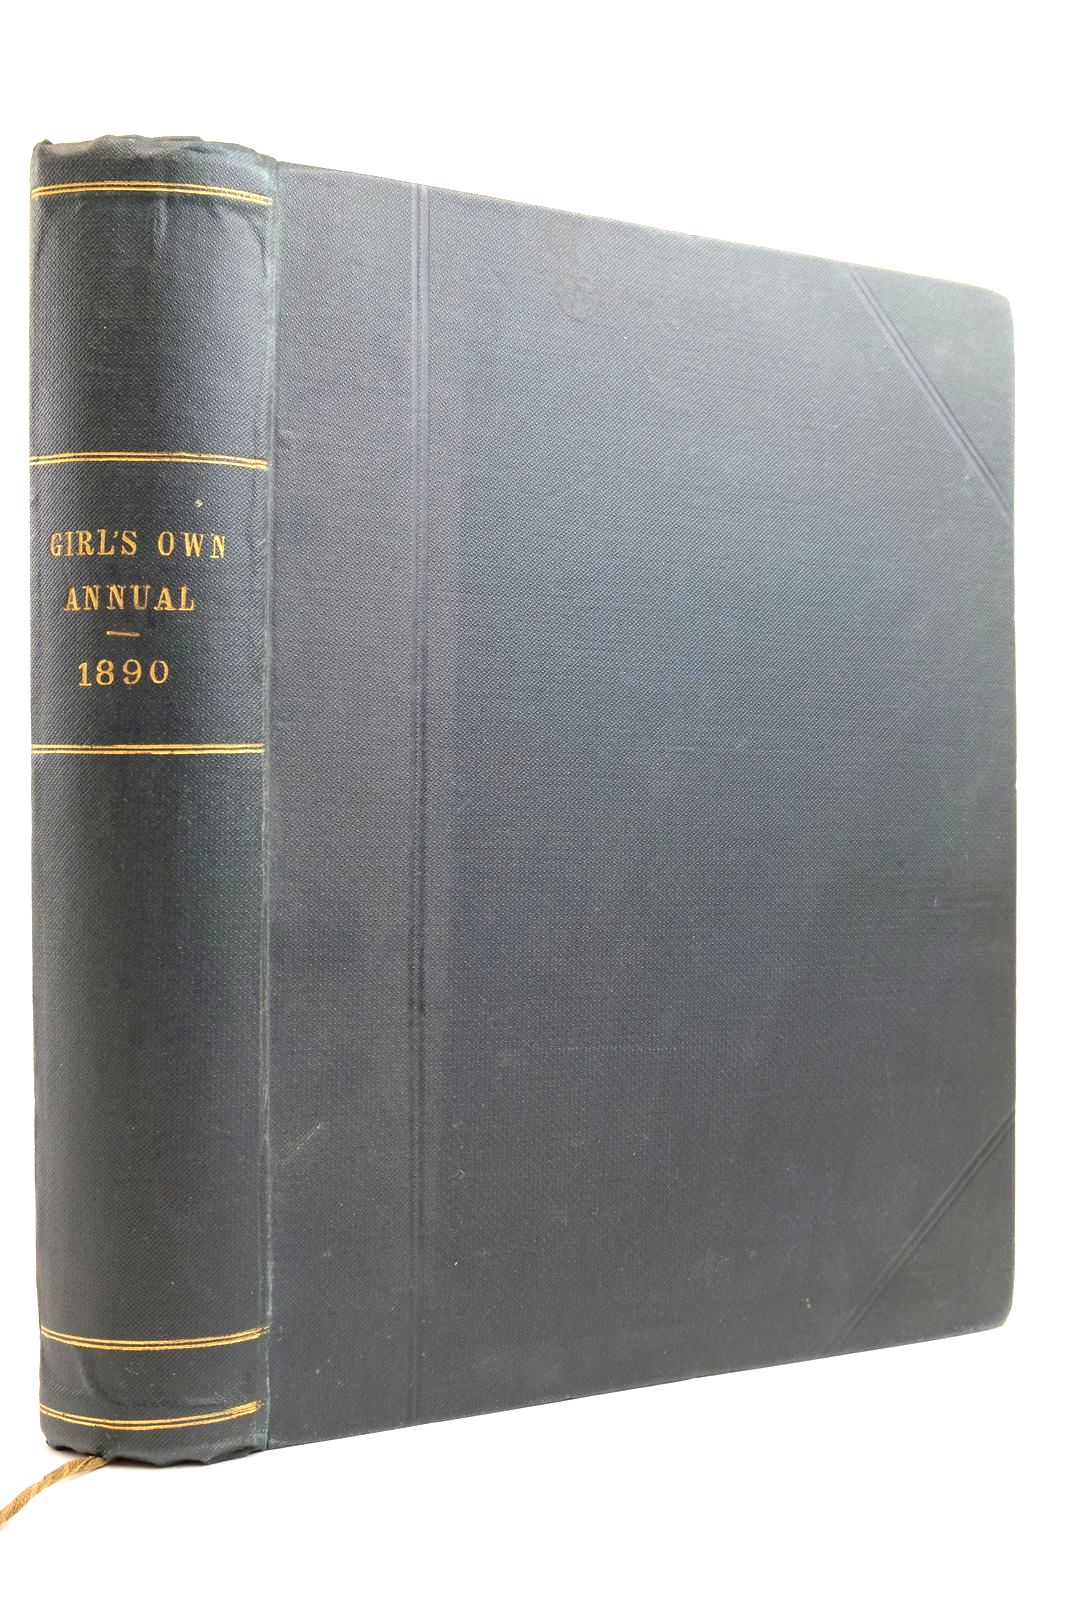 Photo of THE GIRL'S OWN ANNUAL - VOLUME 11 written by Stables, Gordon et al, illustrated by Allen, John et al., published by Girl's Own Paper (STOCK CODE: 2134866)  for sale by Stella & Rose's Books